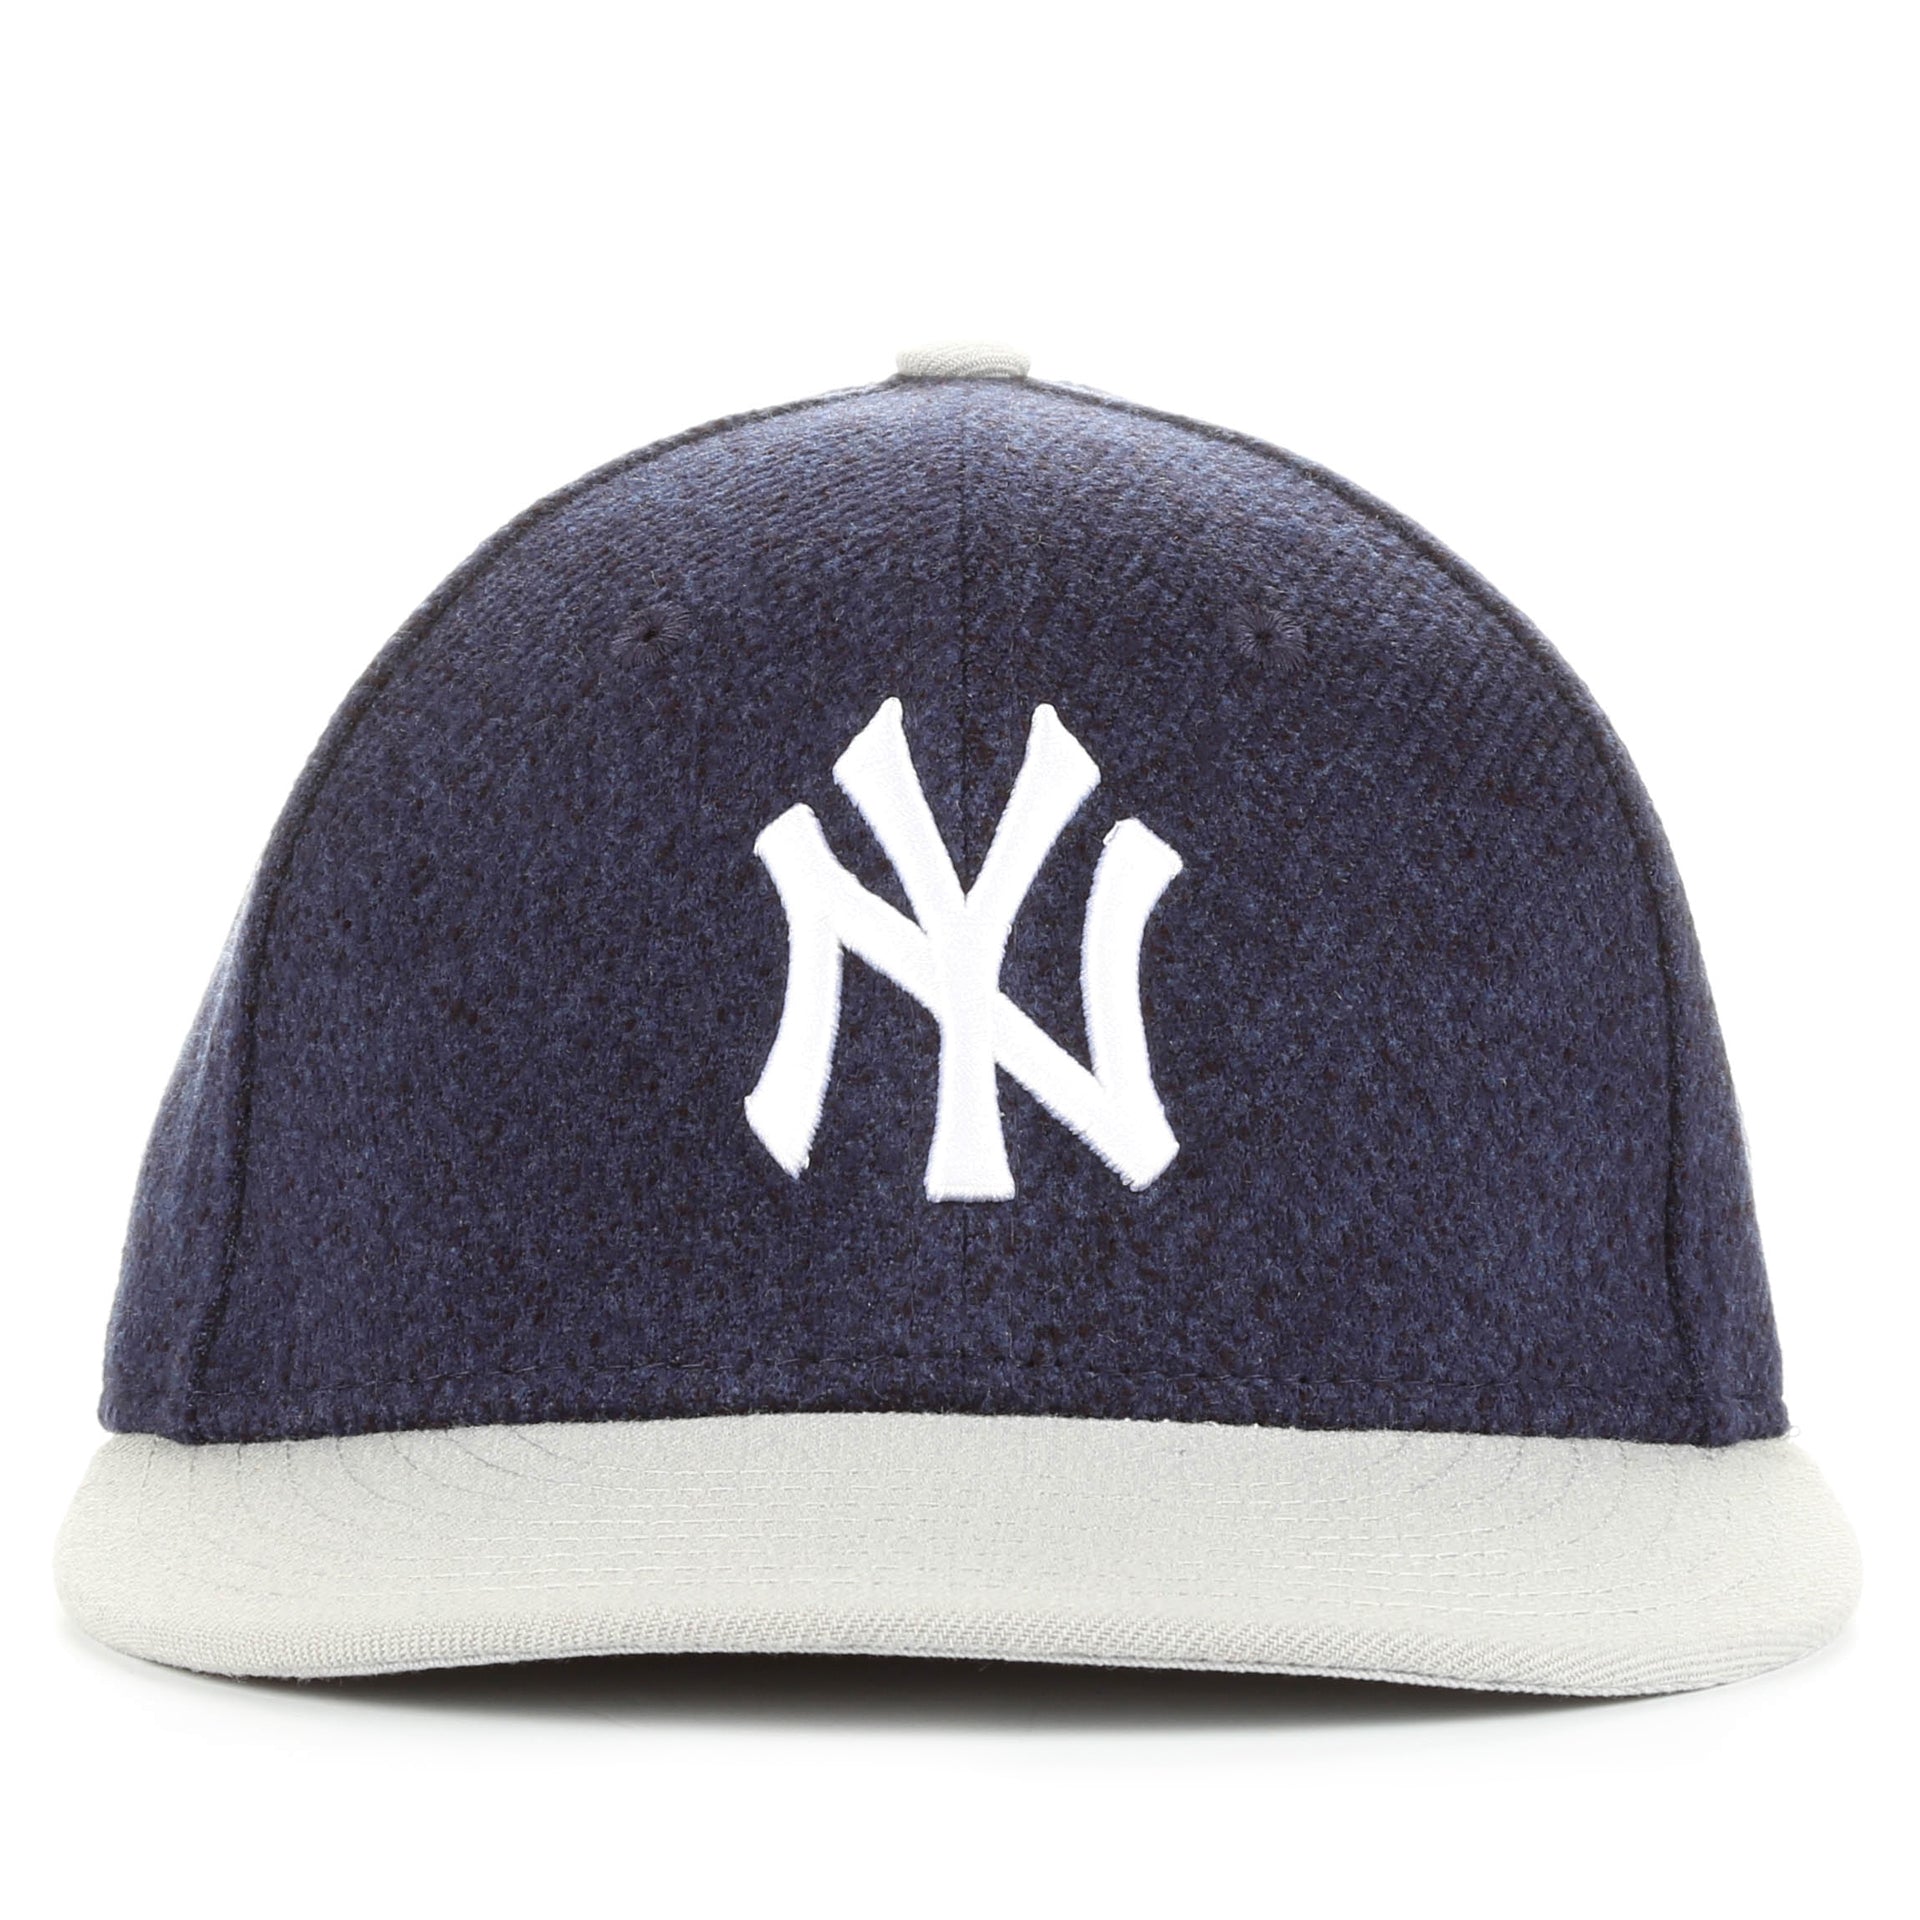 9Fifty Classic New York Yankees Cap by New Era